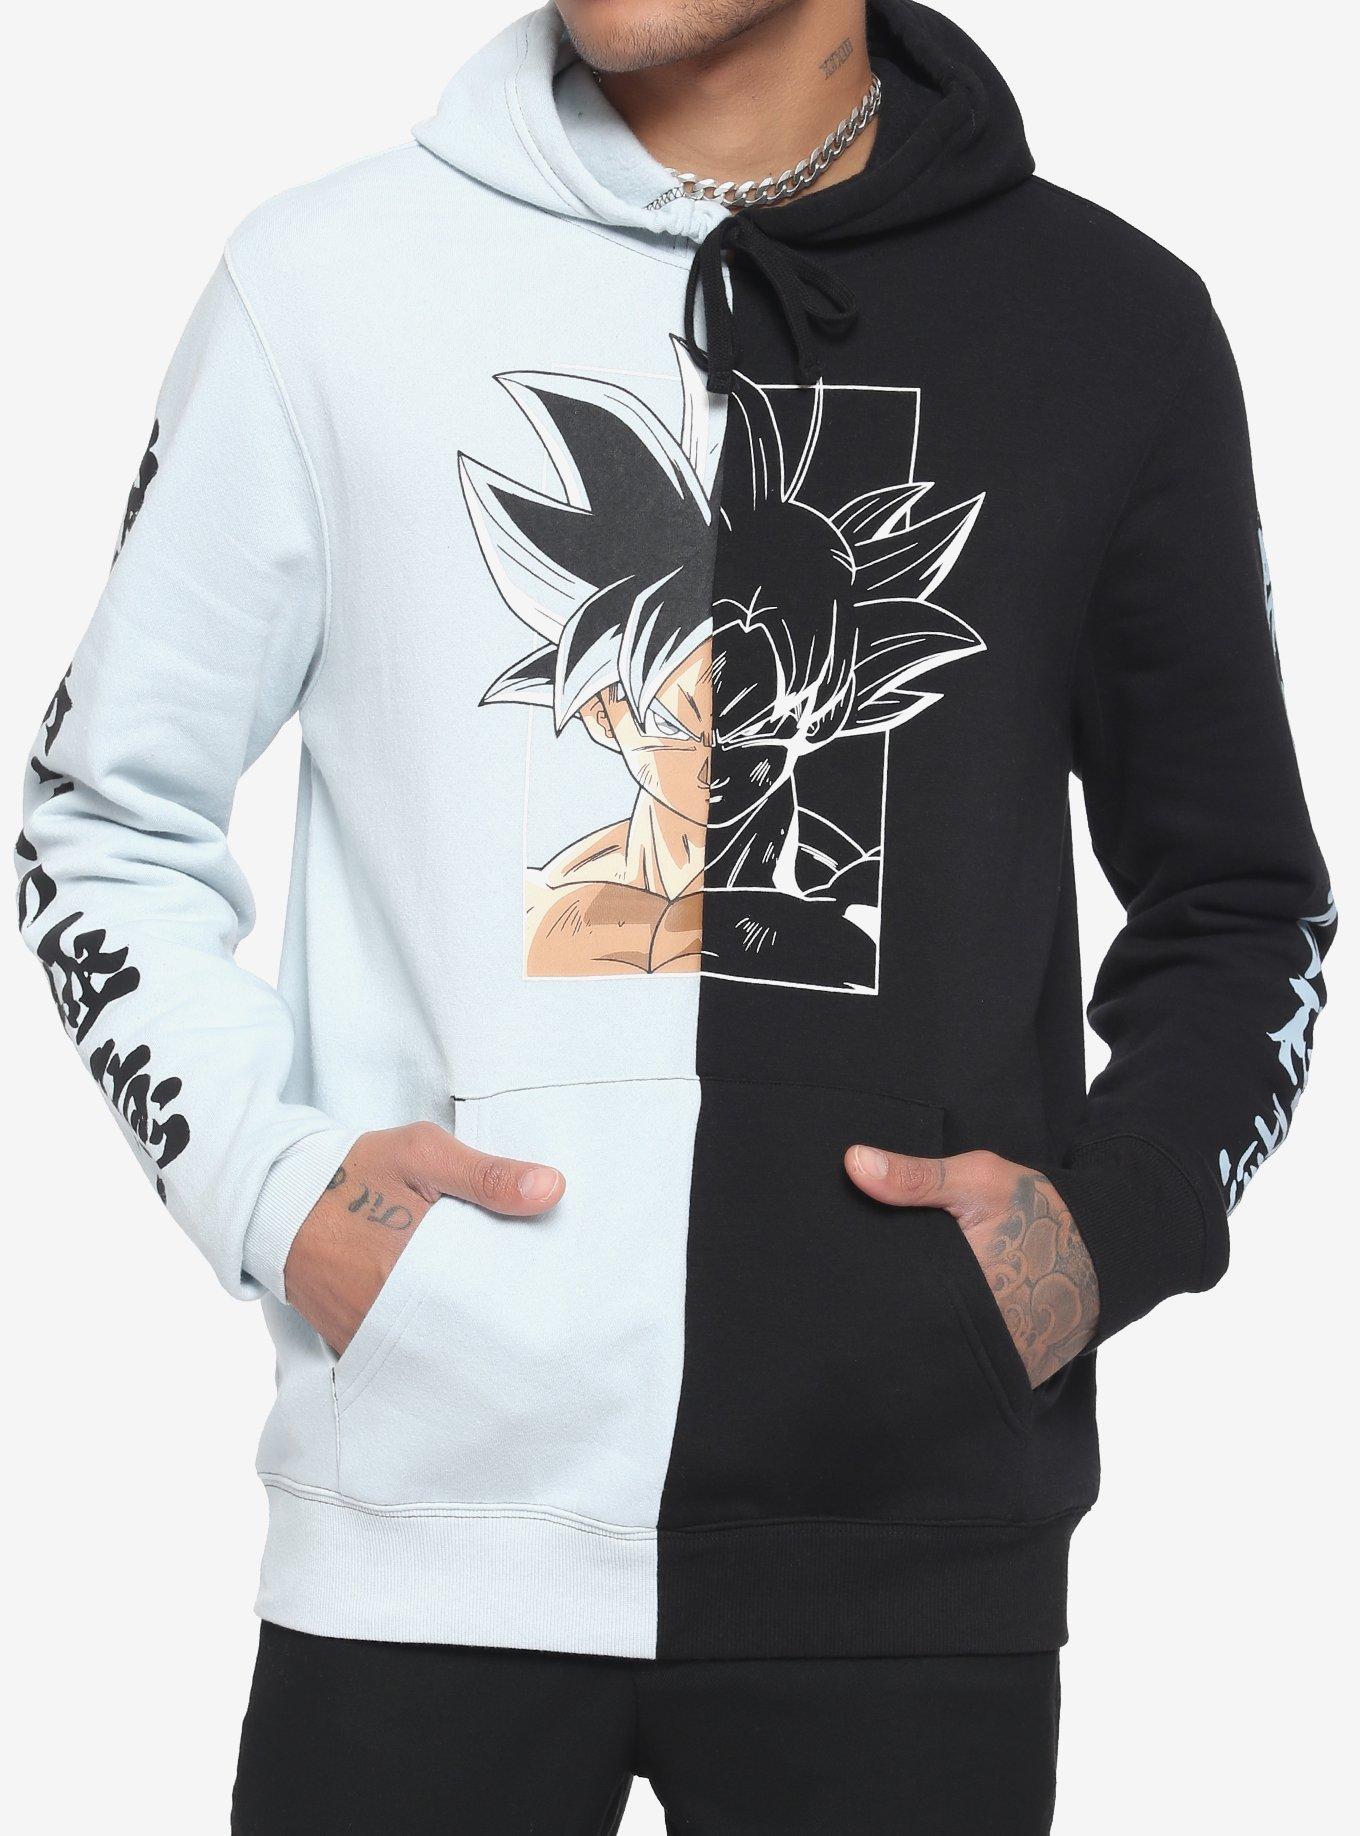 Ultra Instinct Gogeta Pullover Hoodie for Sale by TheWorldRound